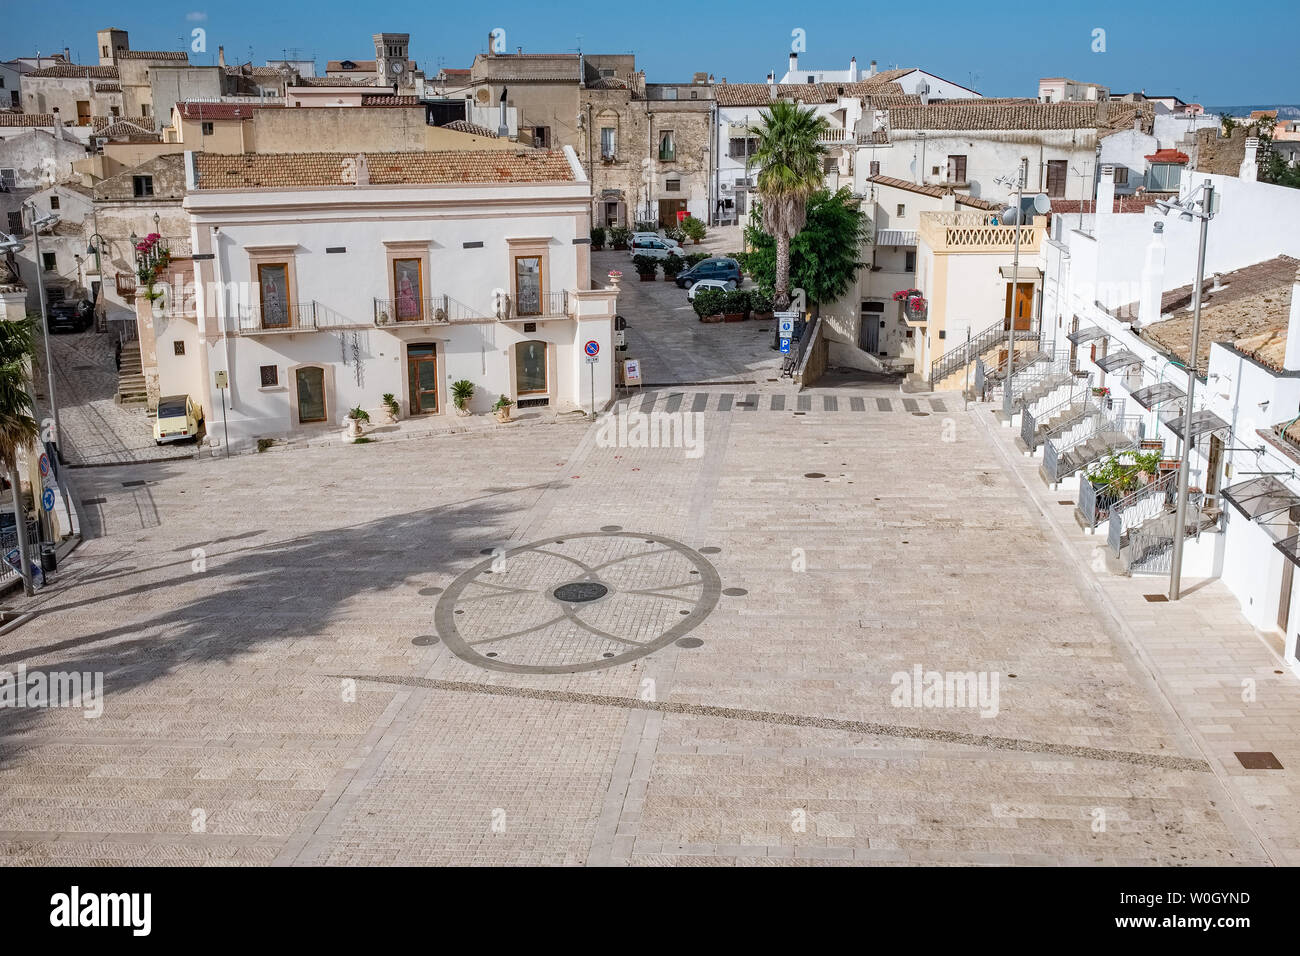 MIGLIONICO, ITALY - AUGUST 28, 2018: Beautiful view over the old town of Miglionico. Basilicata region, Italy Stock Photo